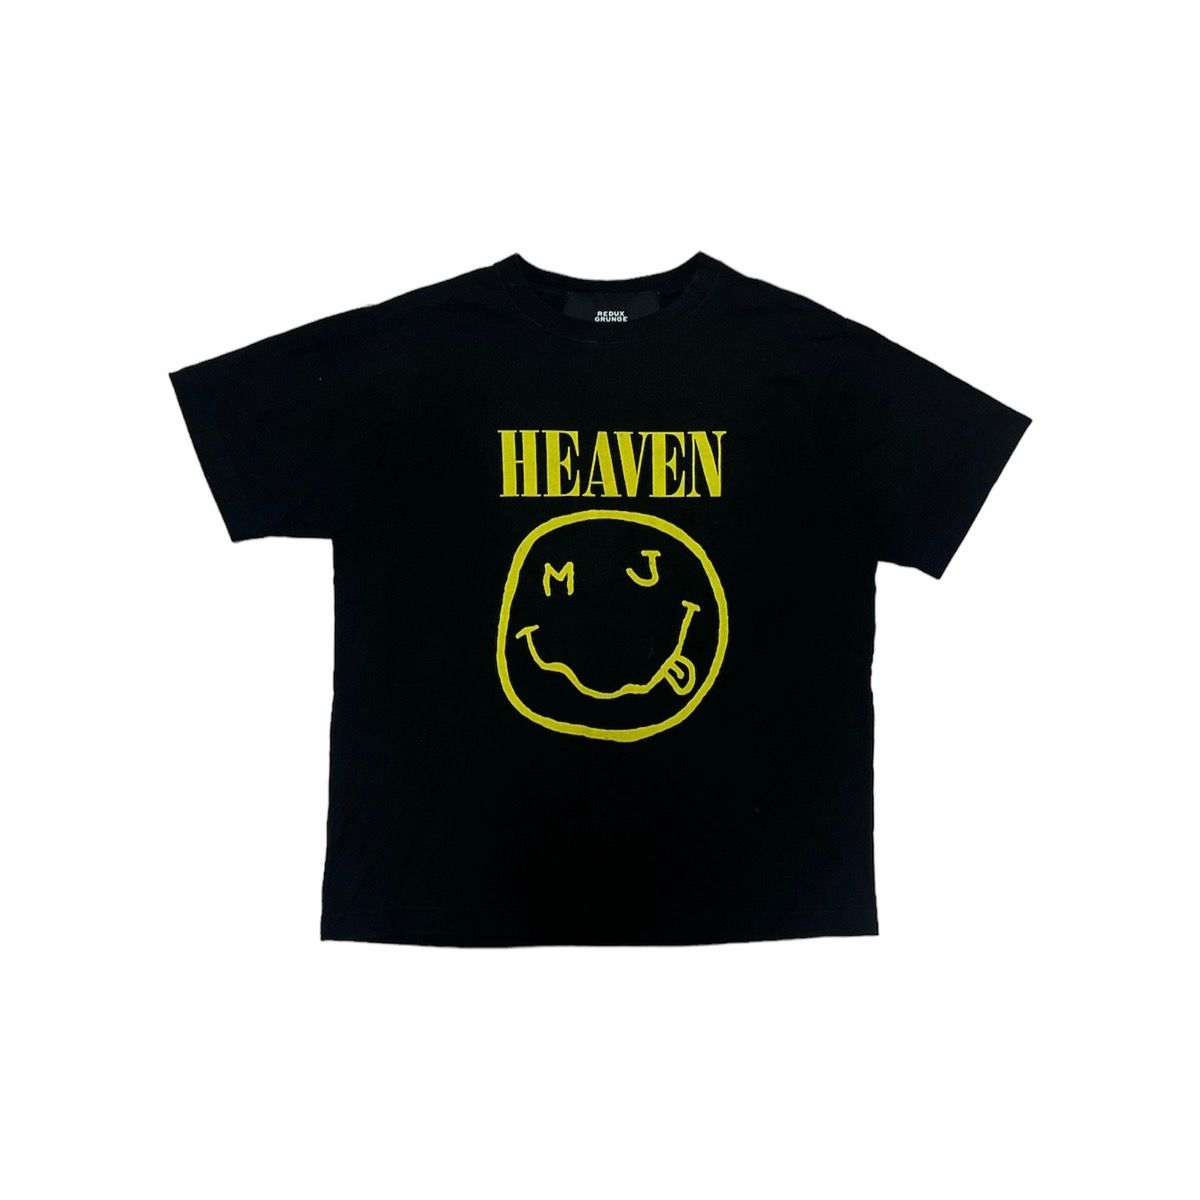 Marc Jacobs Nirvana Redux Grunge Collection 2018 T shirt - 2